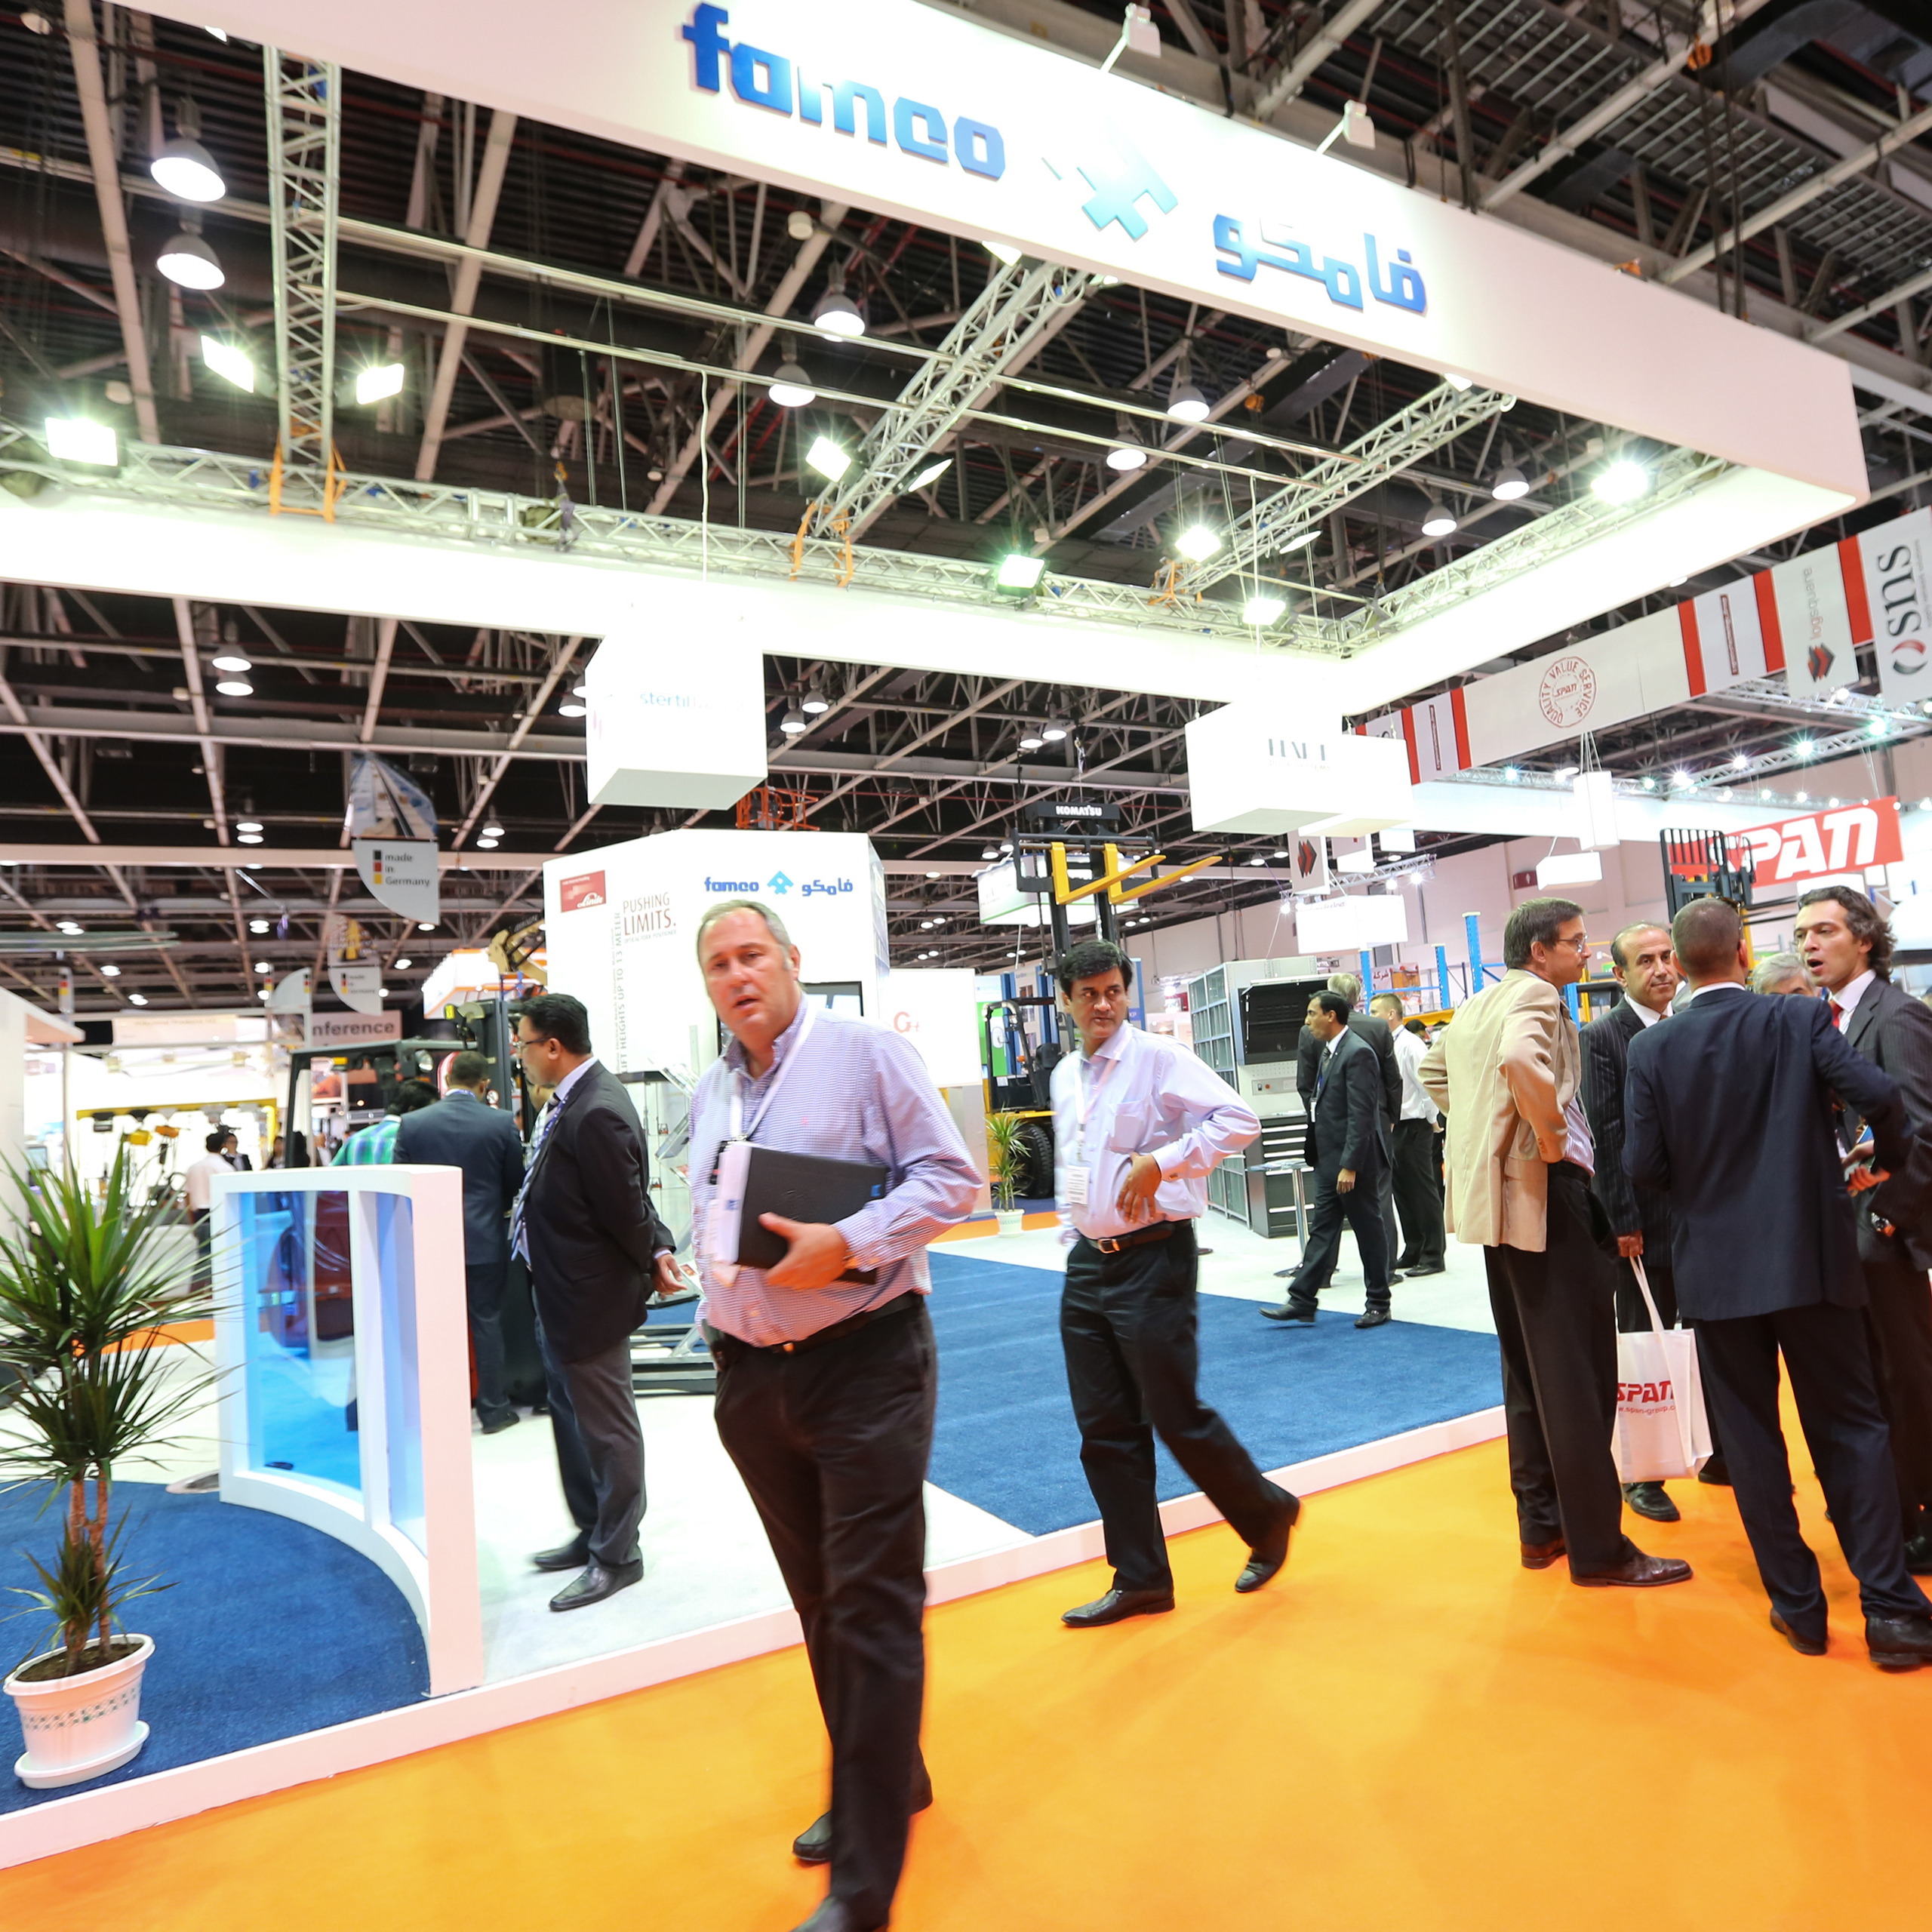 Materials Handling Middle East - FAMCO spearheads UAE charge at Materials Handling Middle East 2015 with latest warehousing and storage solutions